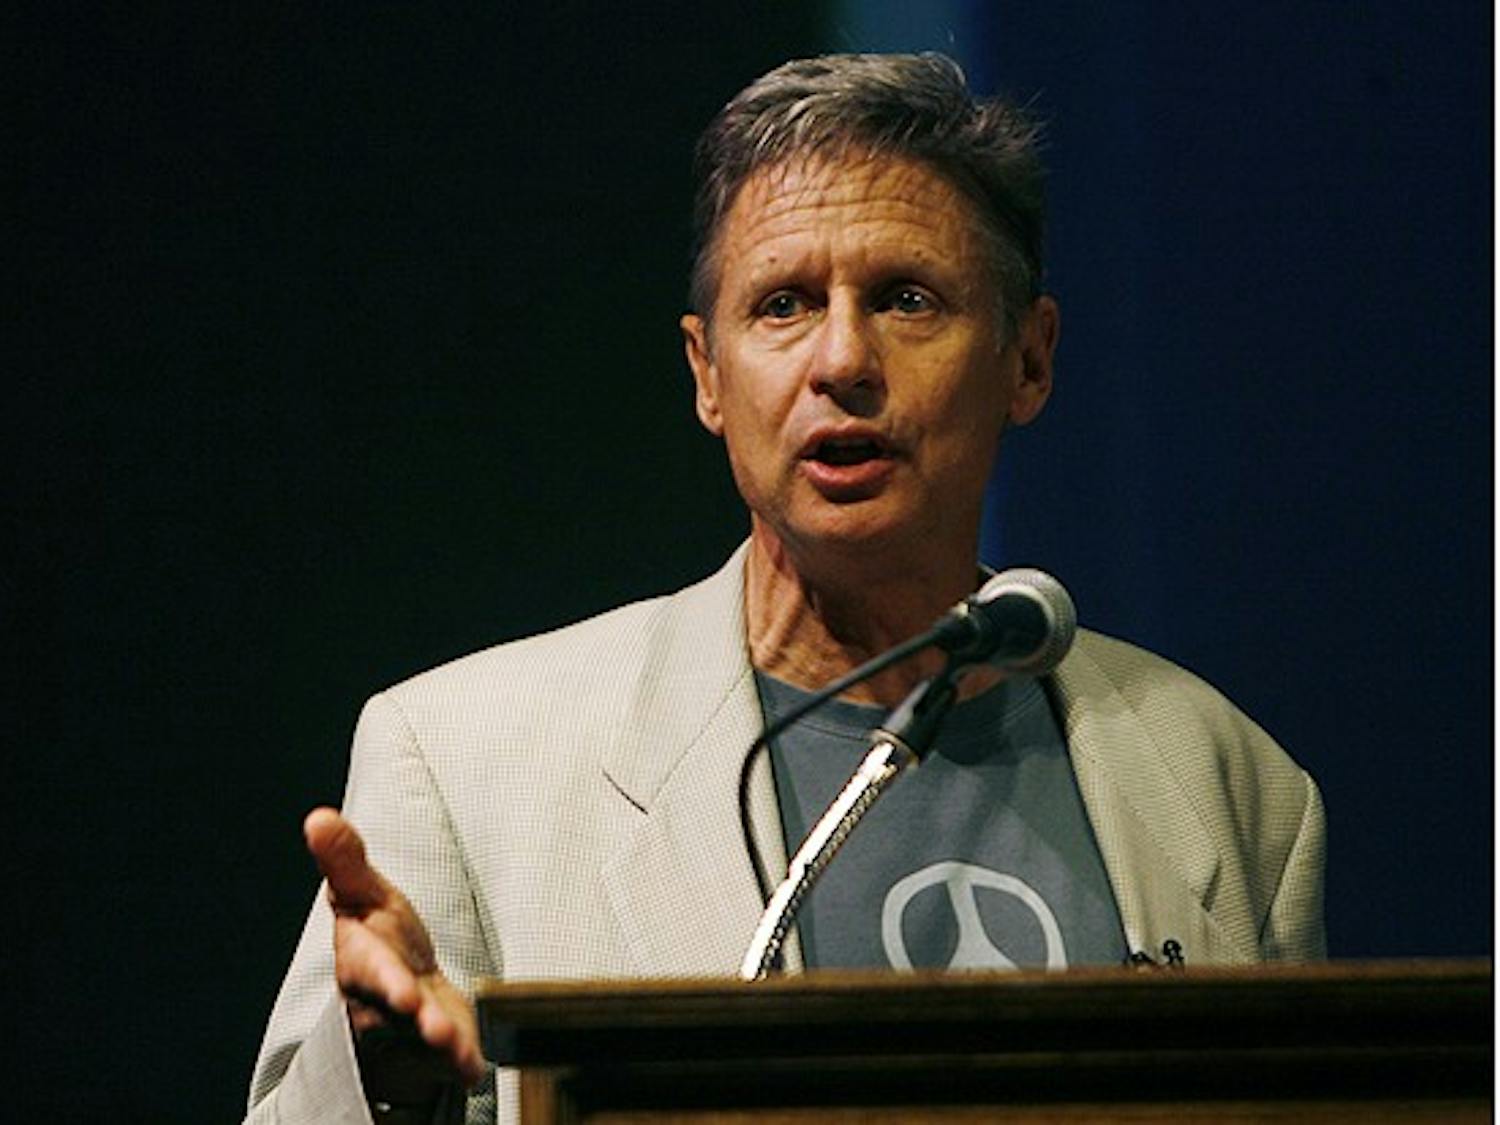 Libertarian presidential candidate Gary Johnson urged students and other supporters to vote for him at Reynolds Theater Wednesday as part of a campaign tour that includes 15 colleges.